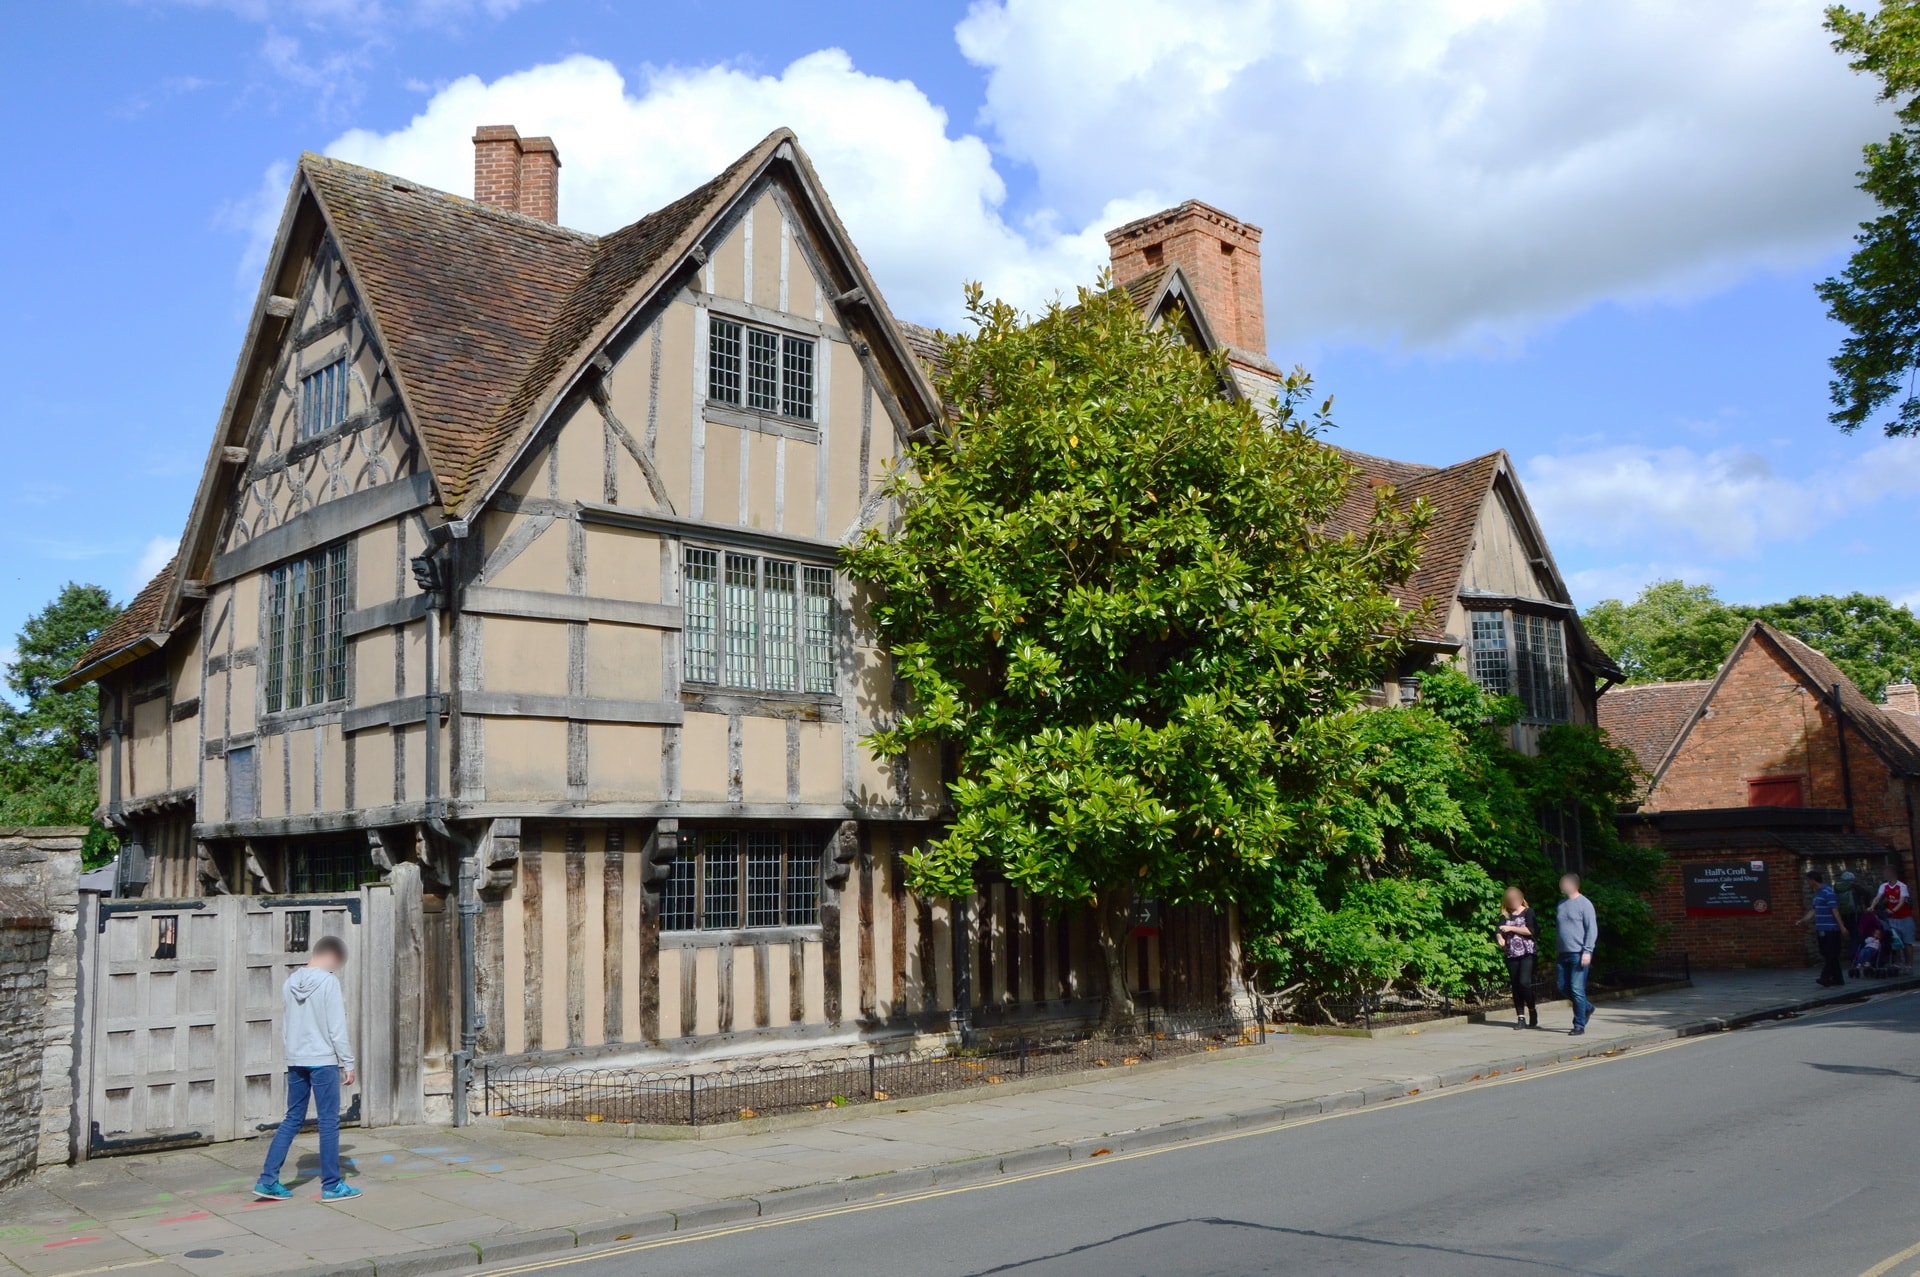 Hall's Croft is a house that was owned by Shakespeare's daughter